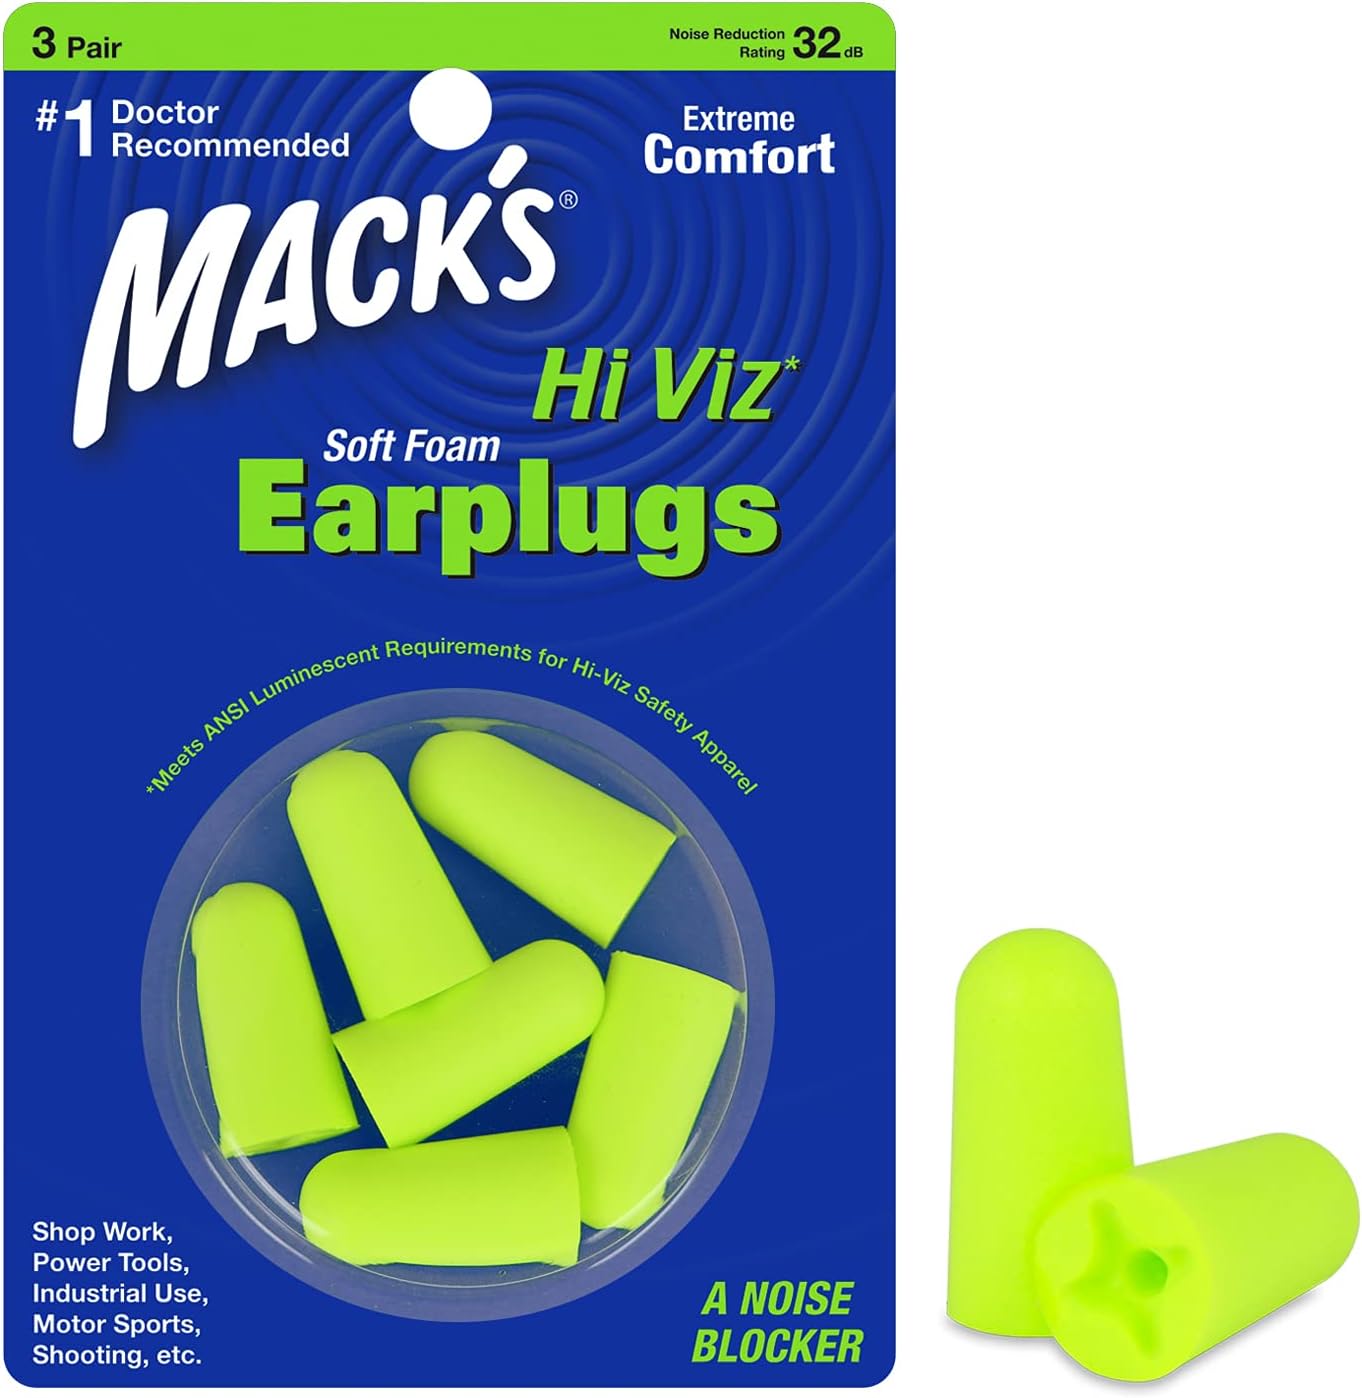 Mack?s Hi Viz Soft Foam Earplugs, 3 Pair ? Most Visible Color, Easy Compliance Checks, 32dB High NRR ? Comfortable, Safe Ear Plugs for Shop Work, Industrial Use, Motor Sports and Shooting